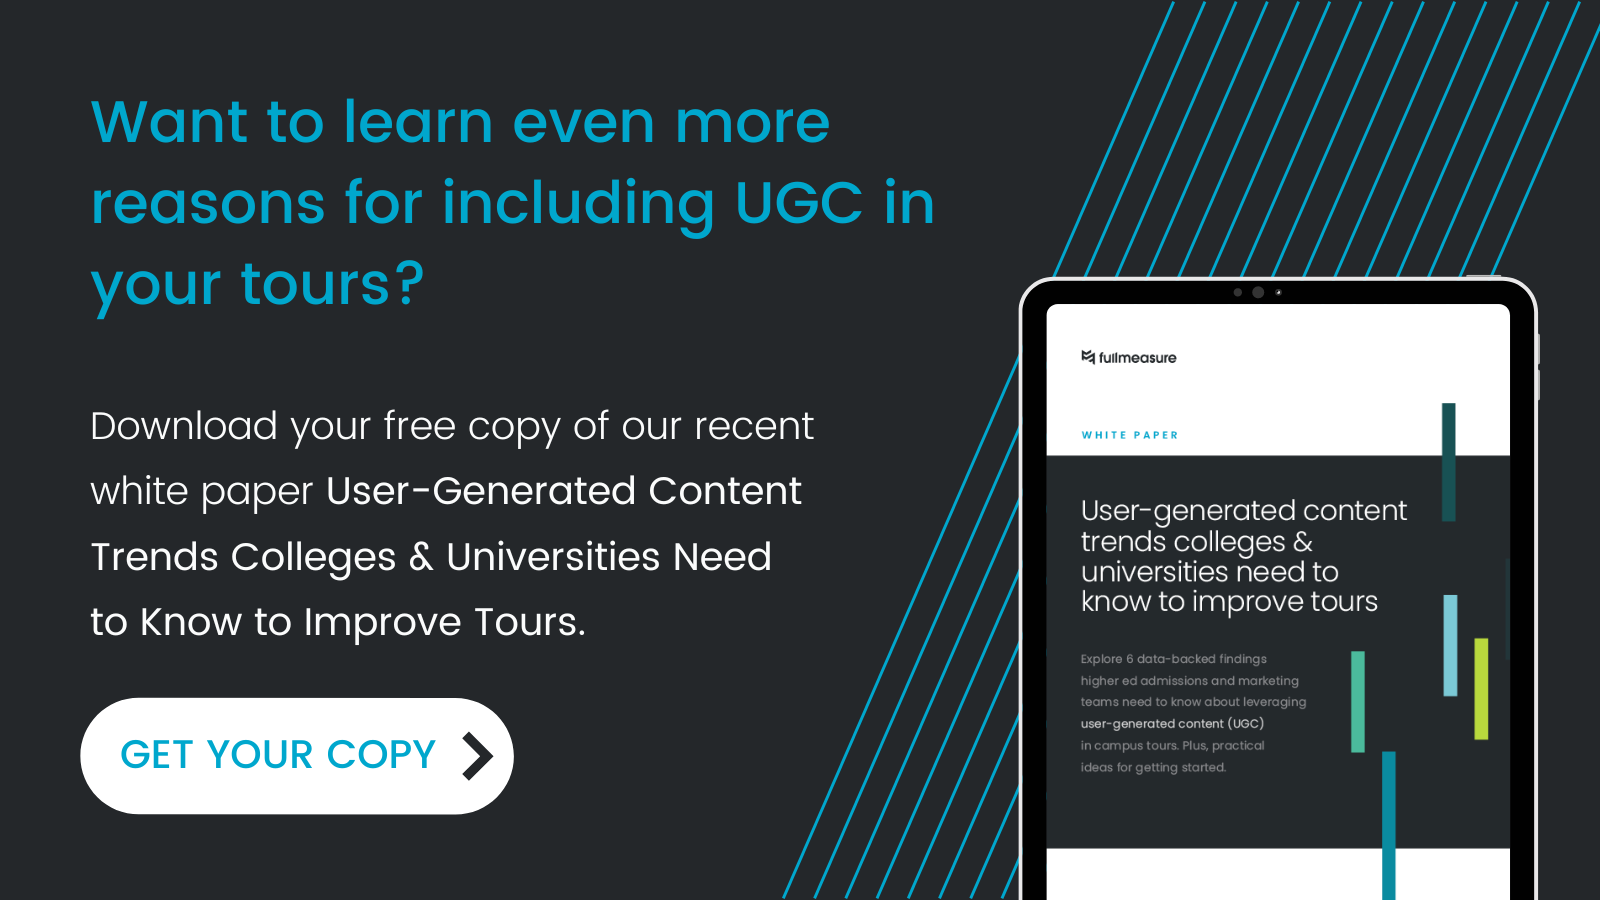 White Paper highlights importance of UGC in tours